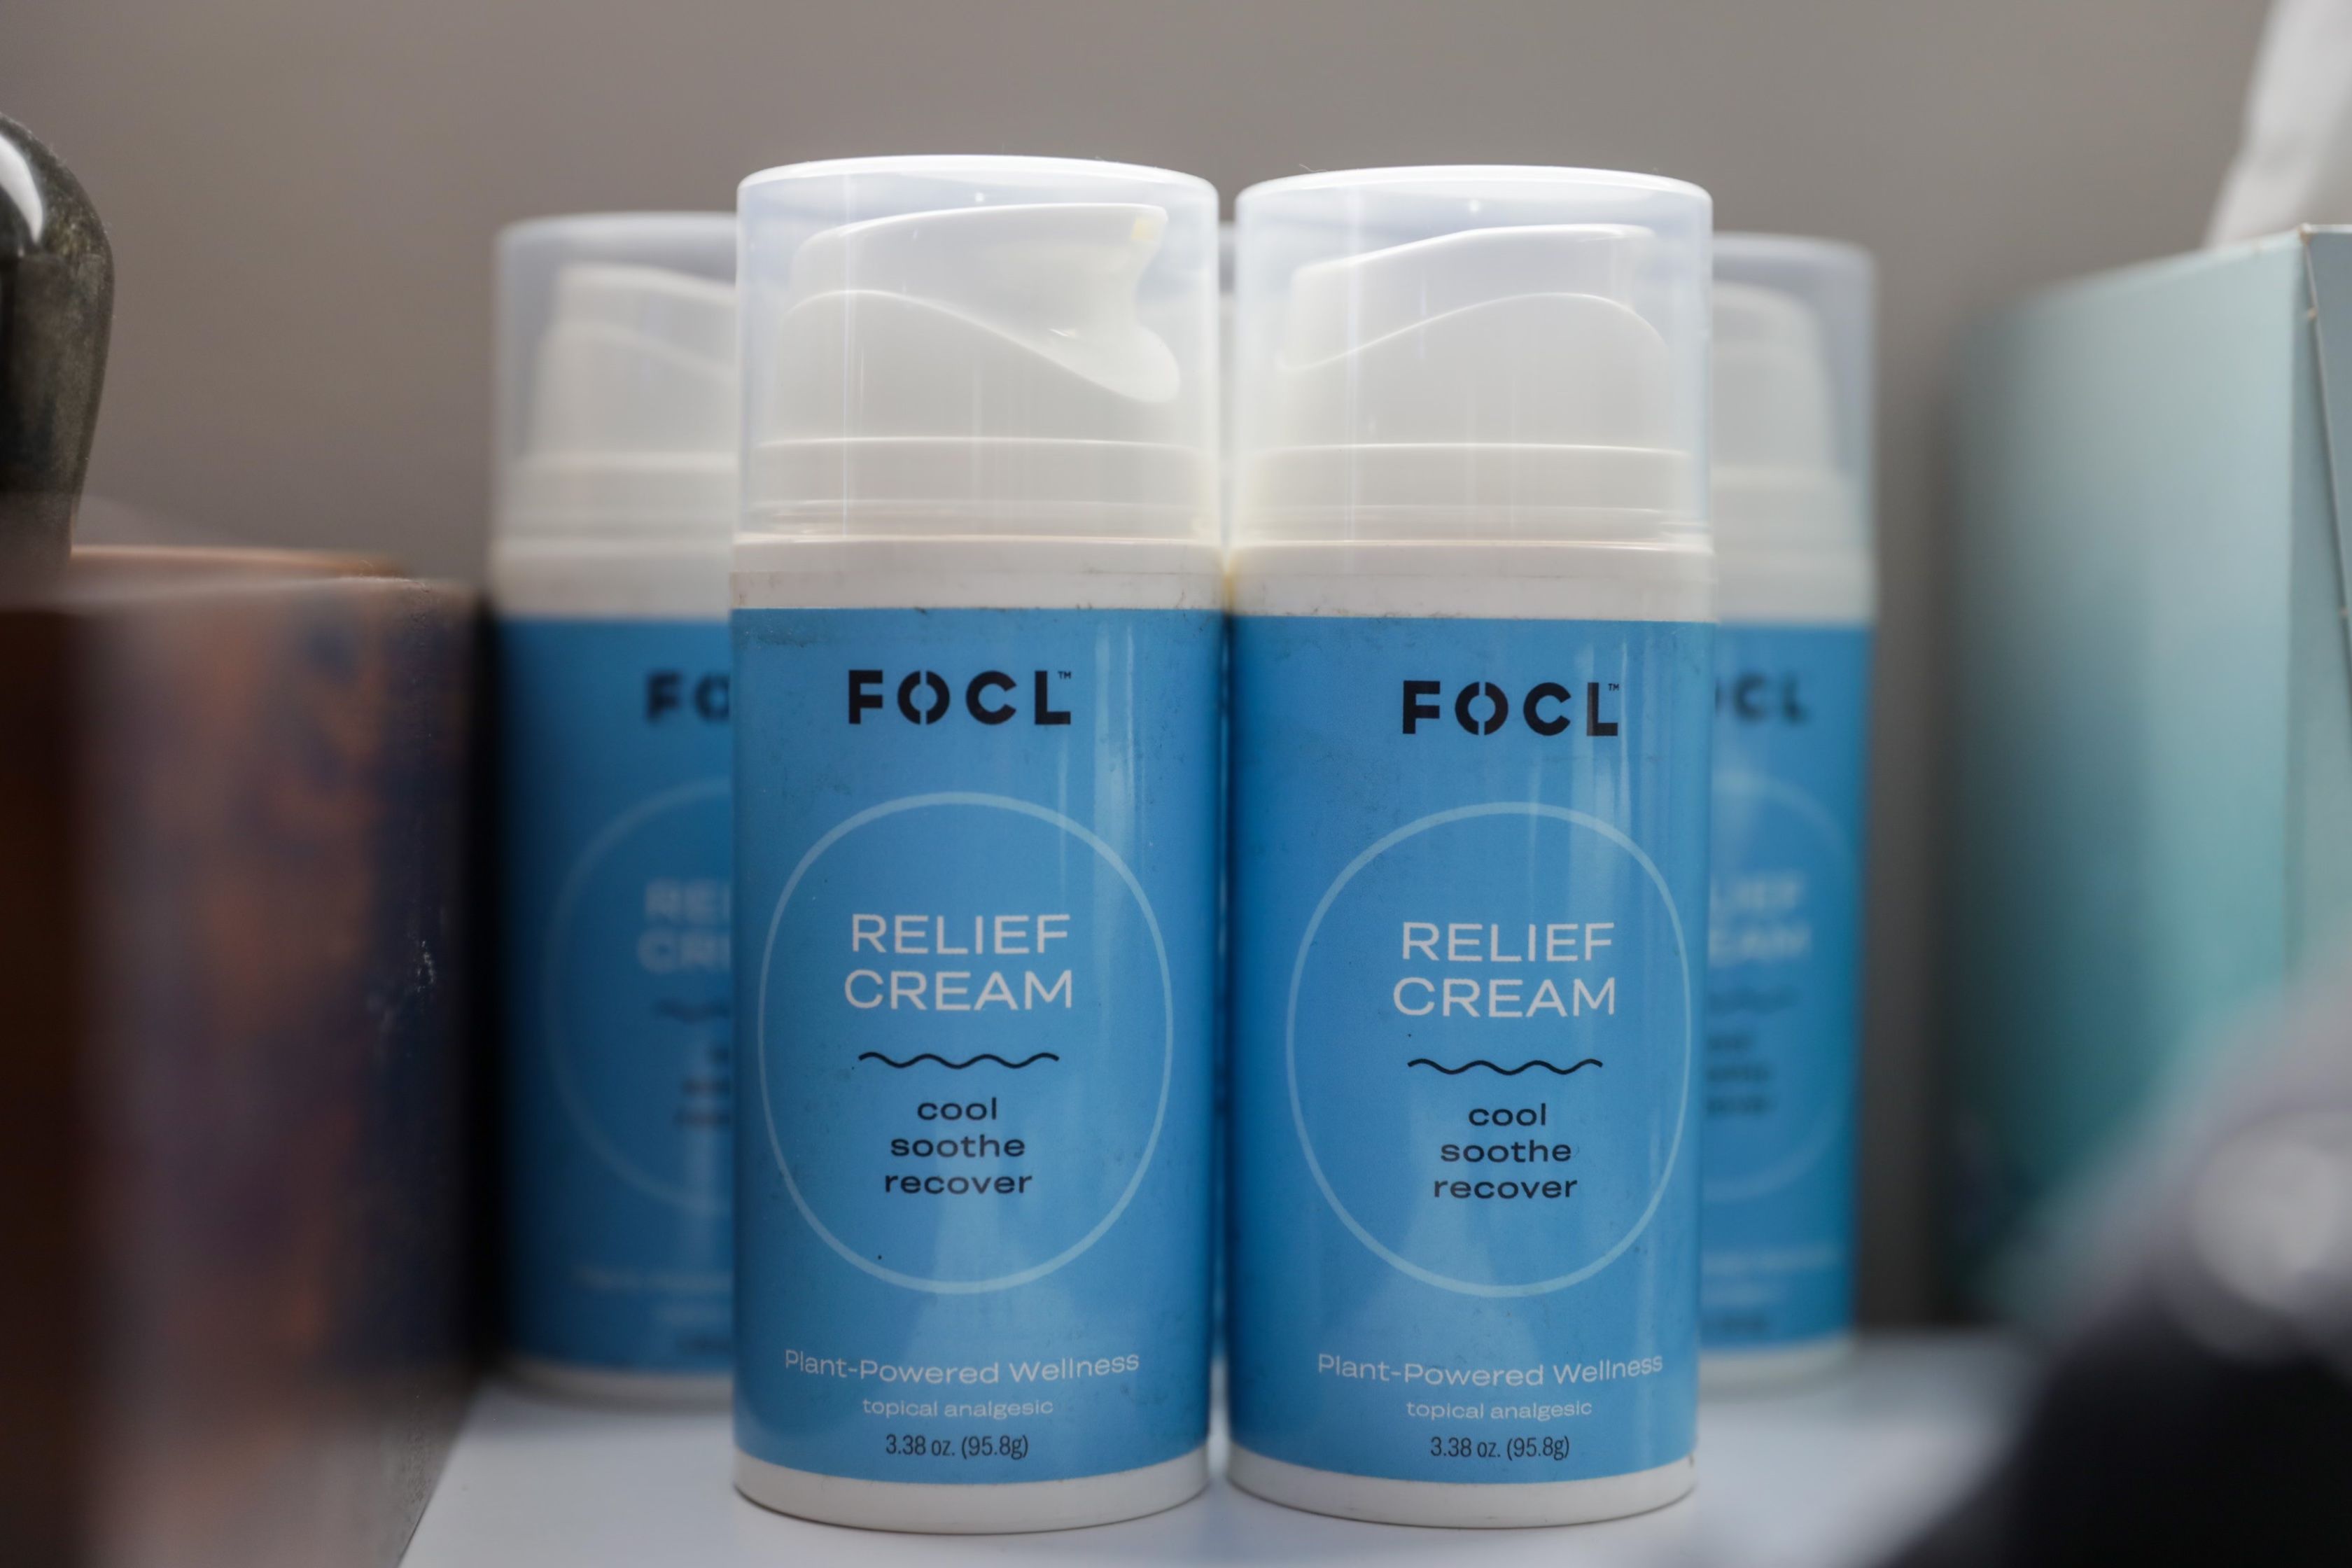 Several blue bottles of FOCL relief cream